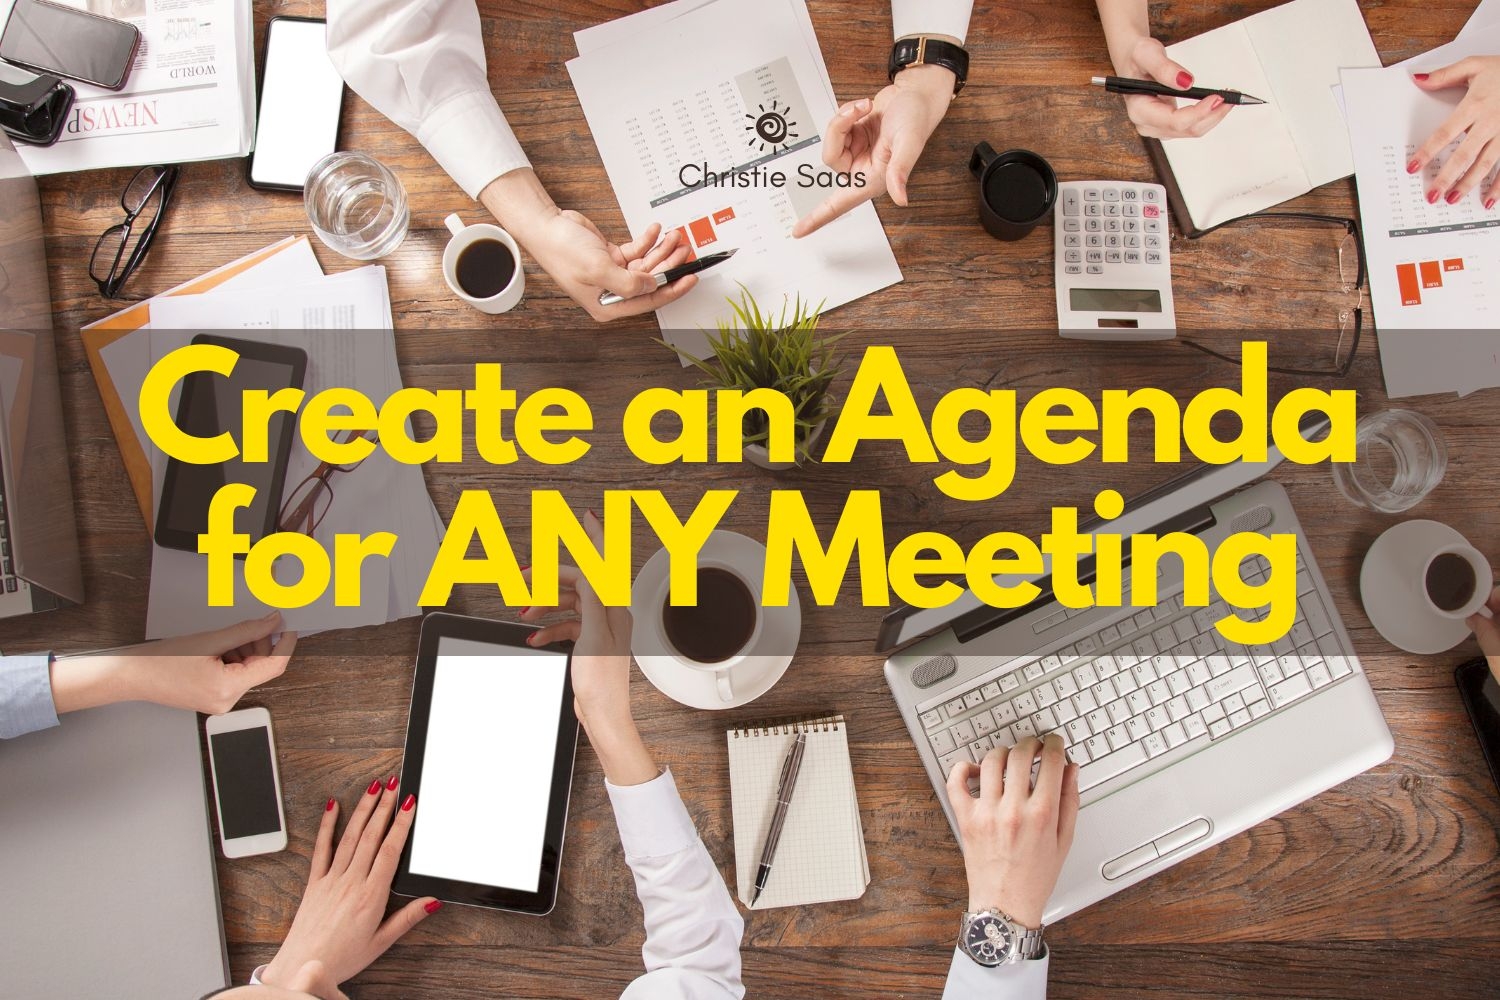 Create an Agenda for ANY Meeting